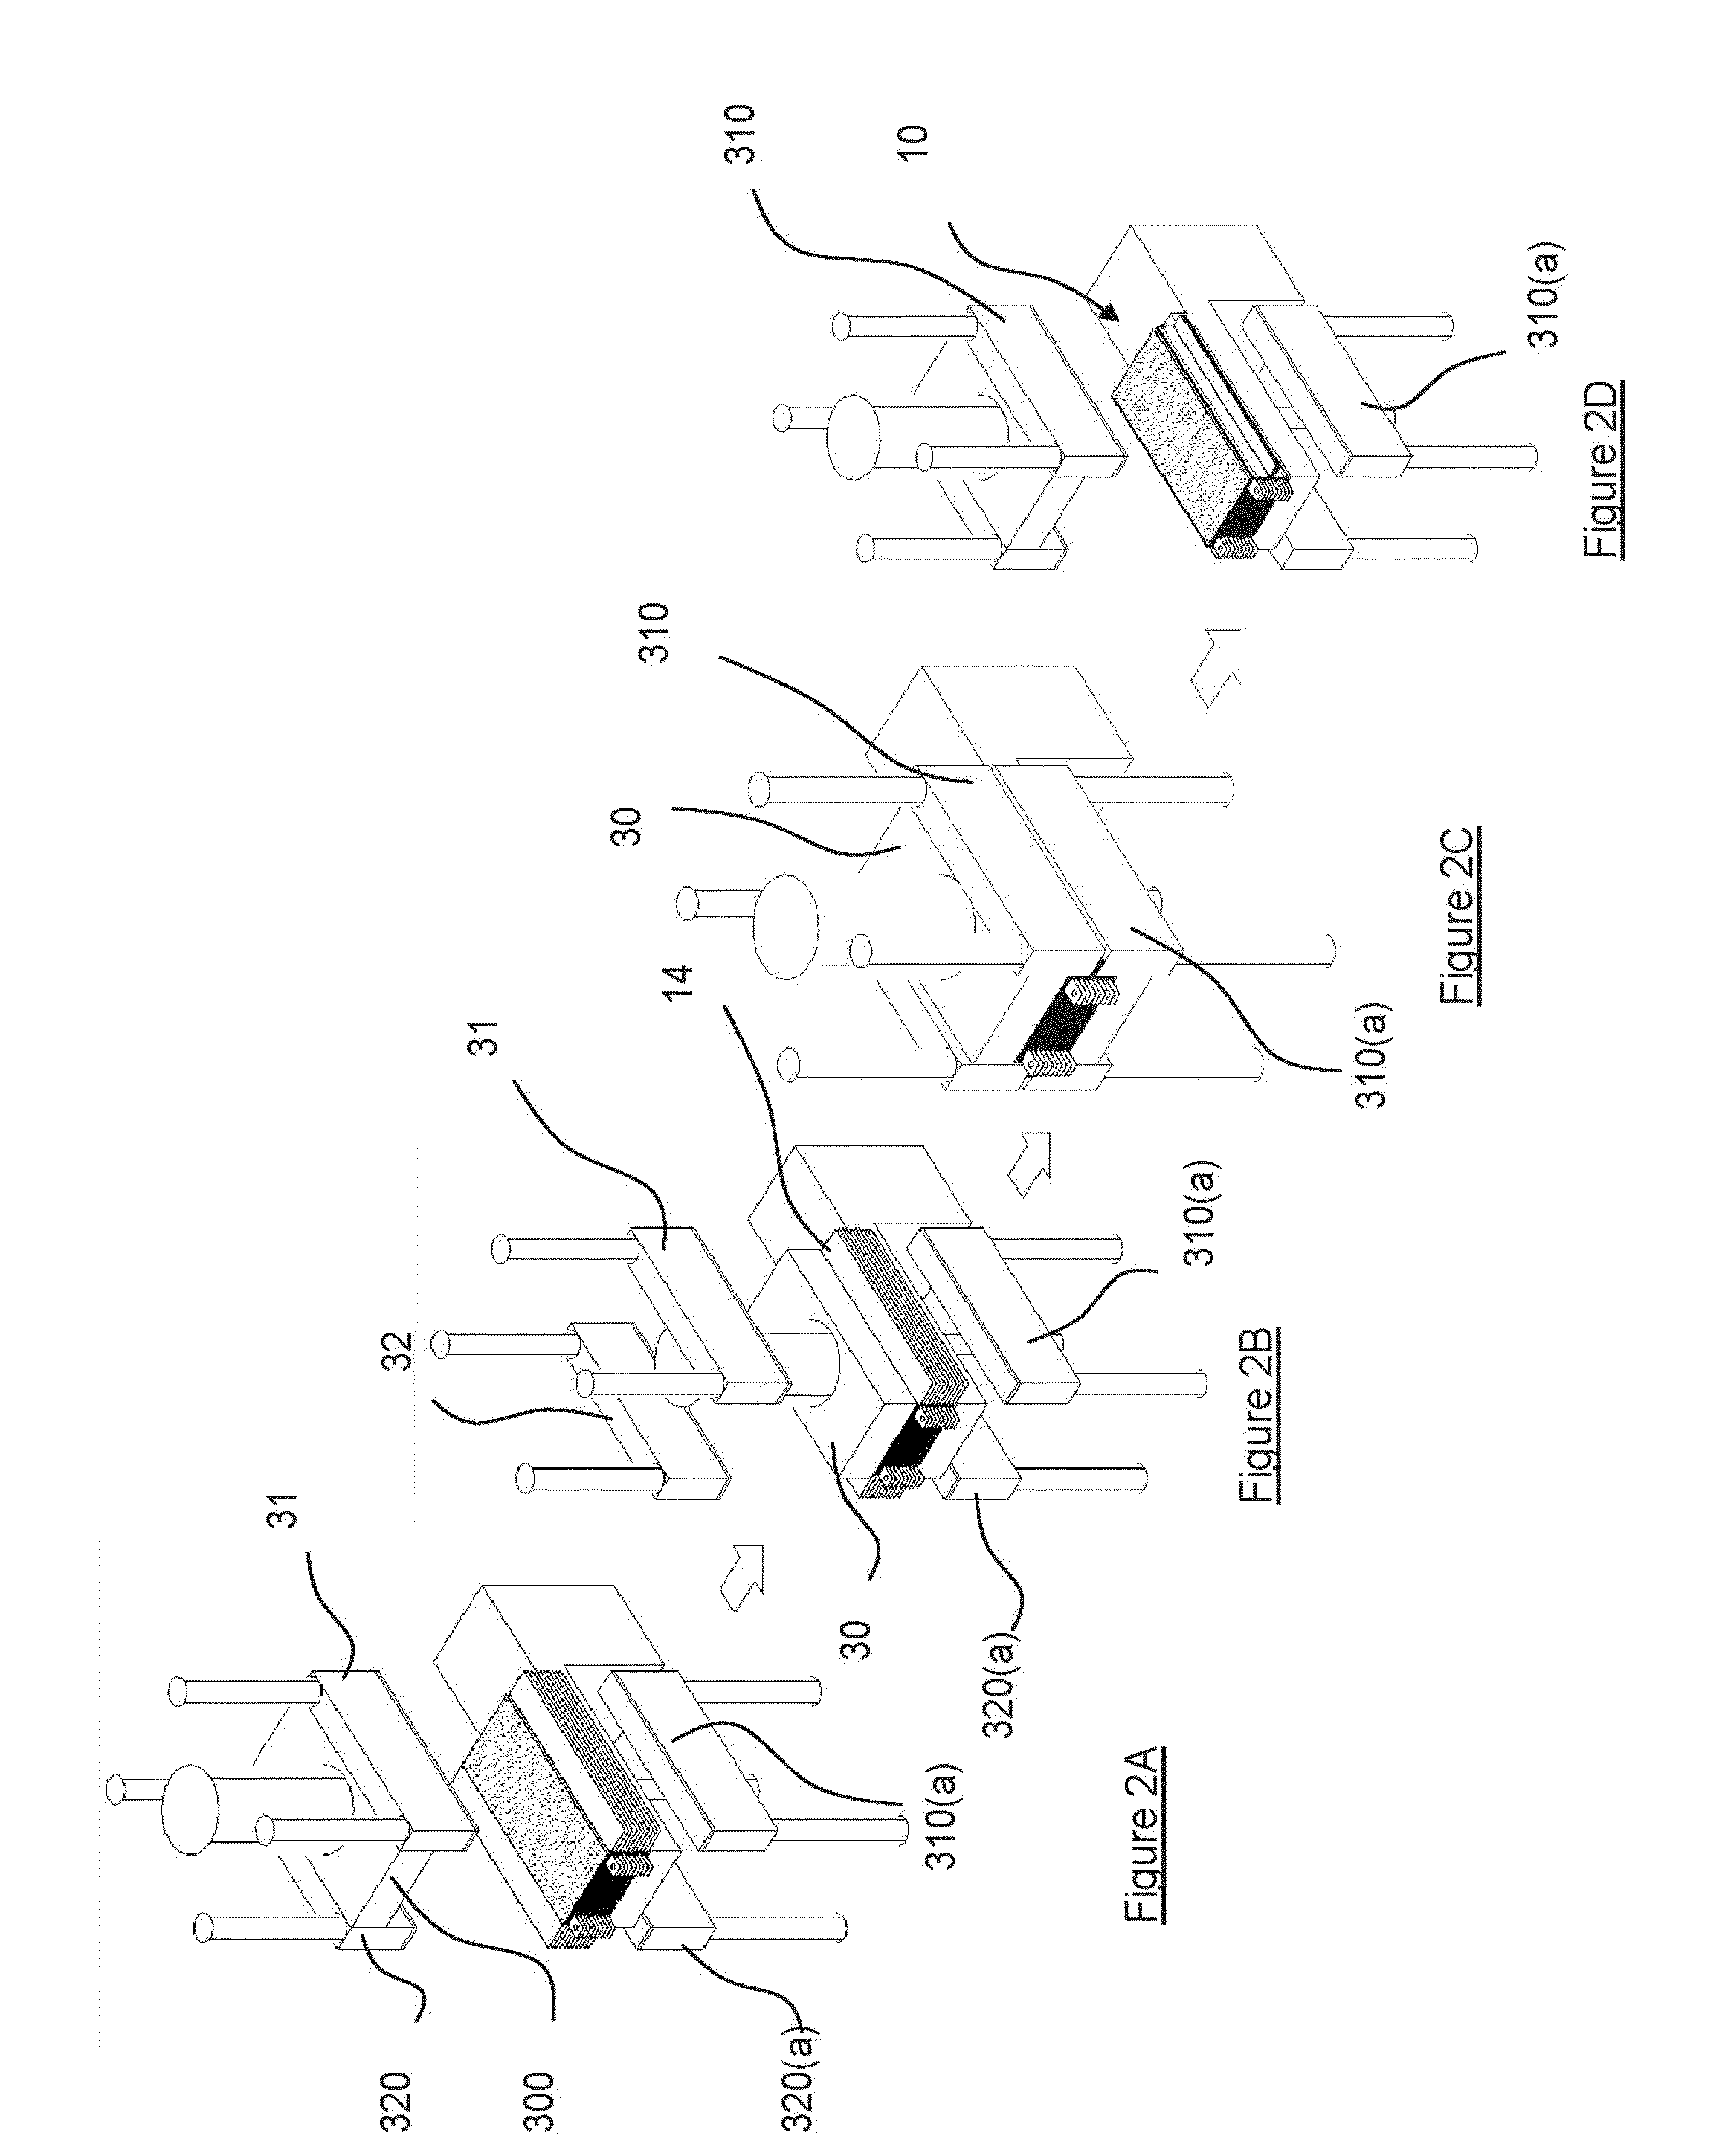 Prismatic batteries and electronic components comprising a stack of insulated electrode plates